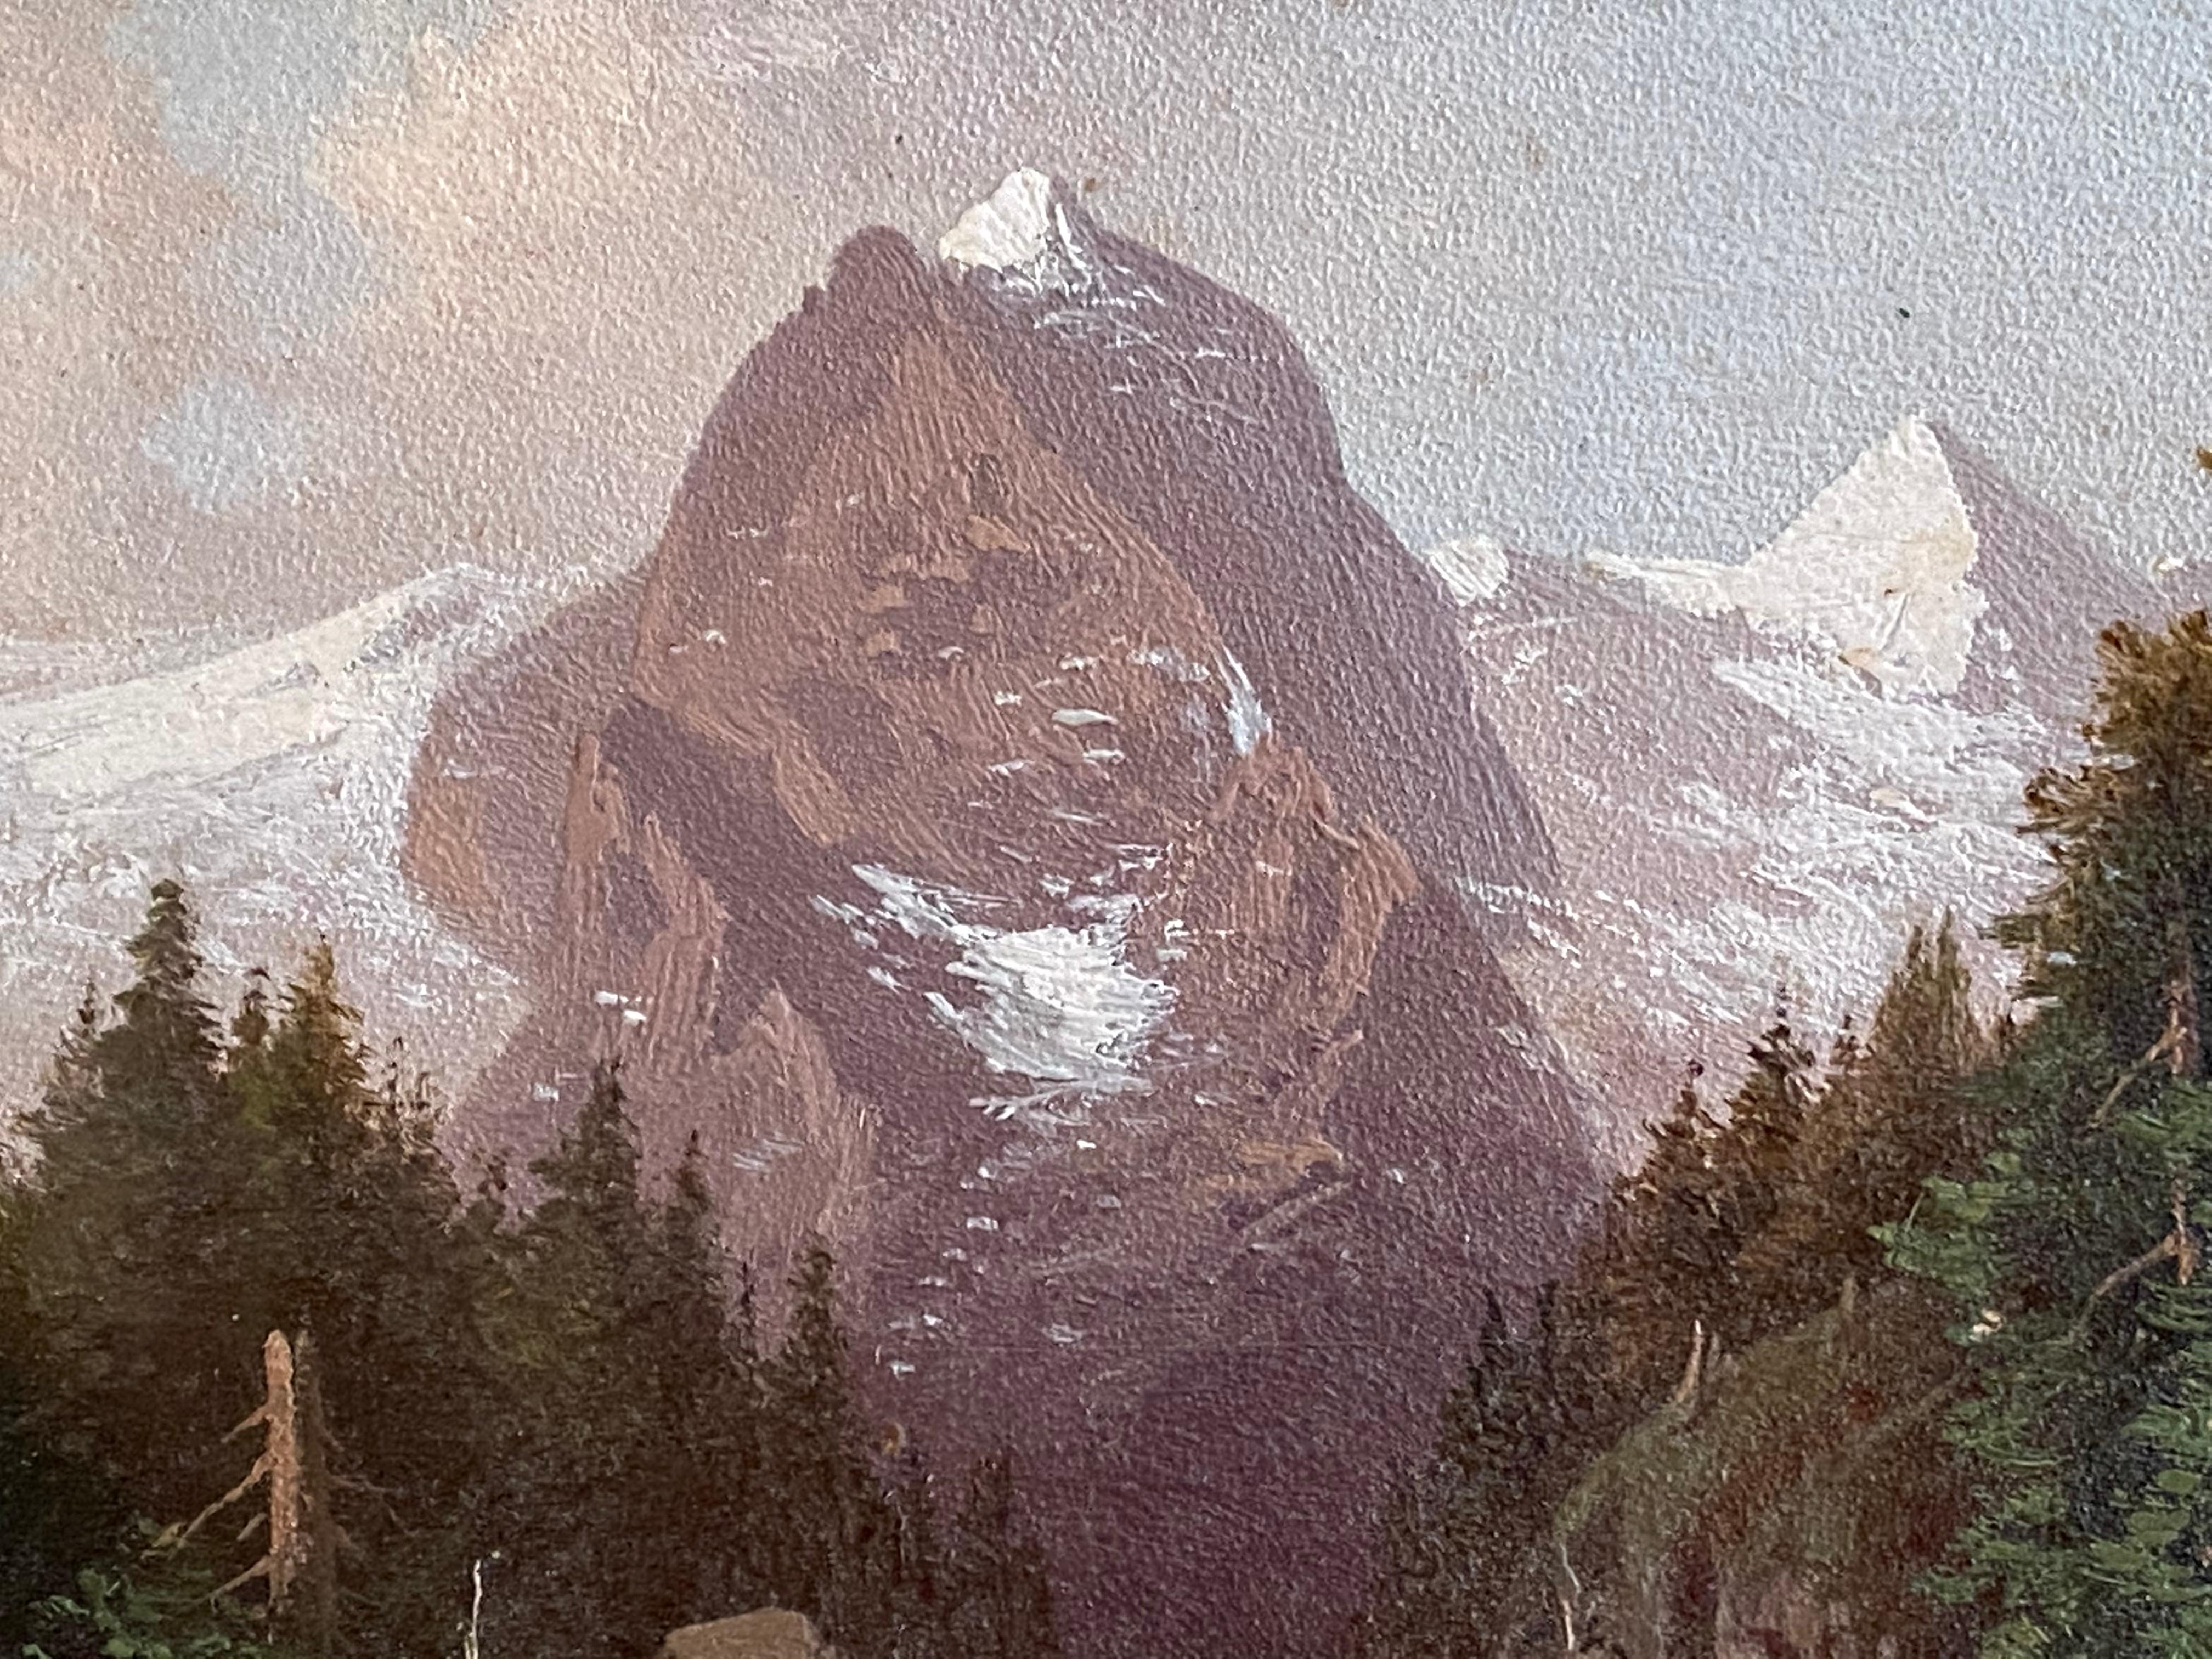 Here for your consideration is a wonderfully detailed miniature painting of the Matterhorn. Signed and titled verso. Attributed to the artist William Archibald Wall. Dated 6/50 verso. Oil on heavy card stock. Der Zustand ist ausgezeichnet. Presently